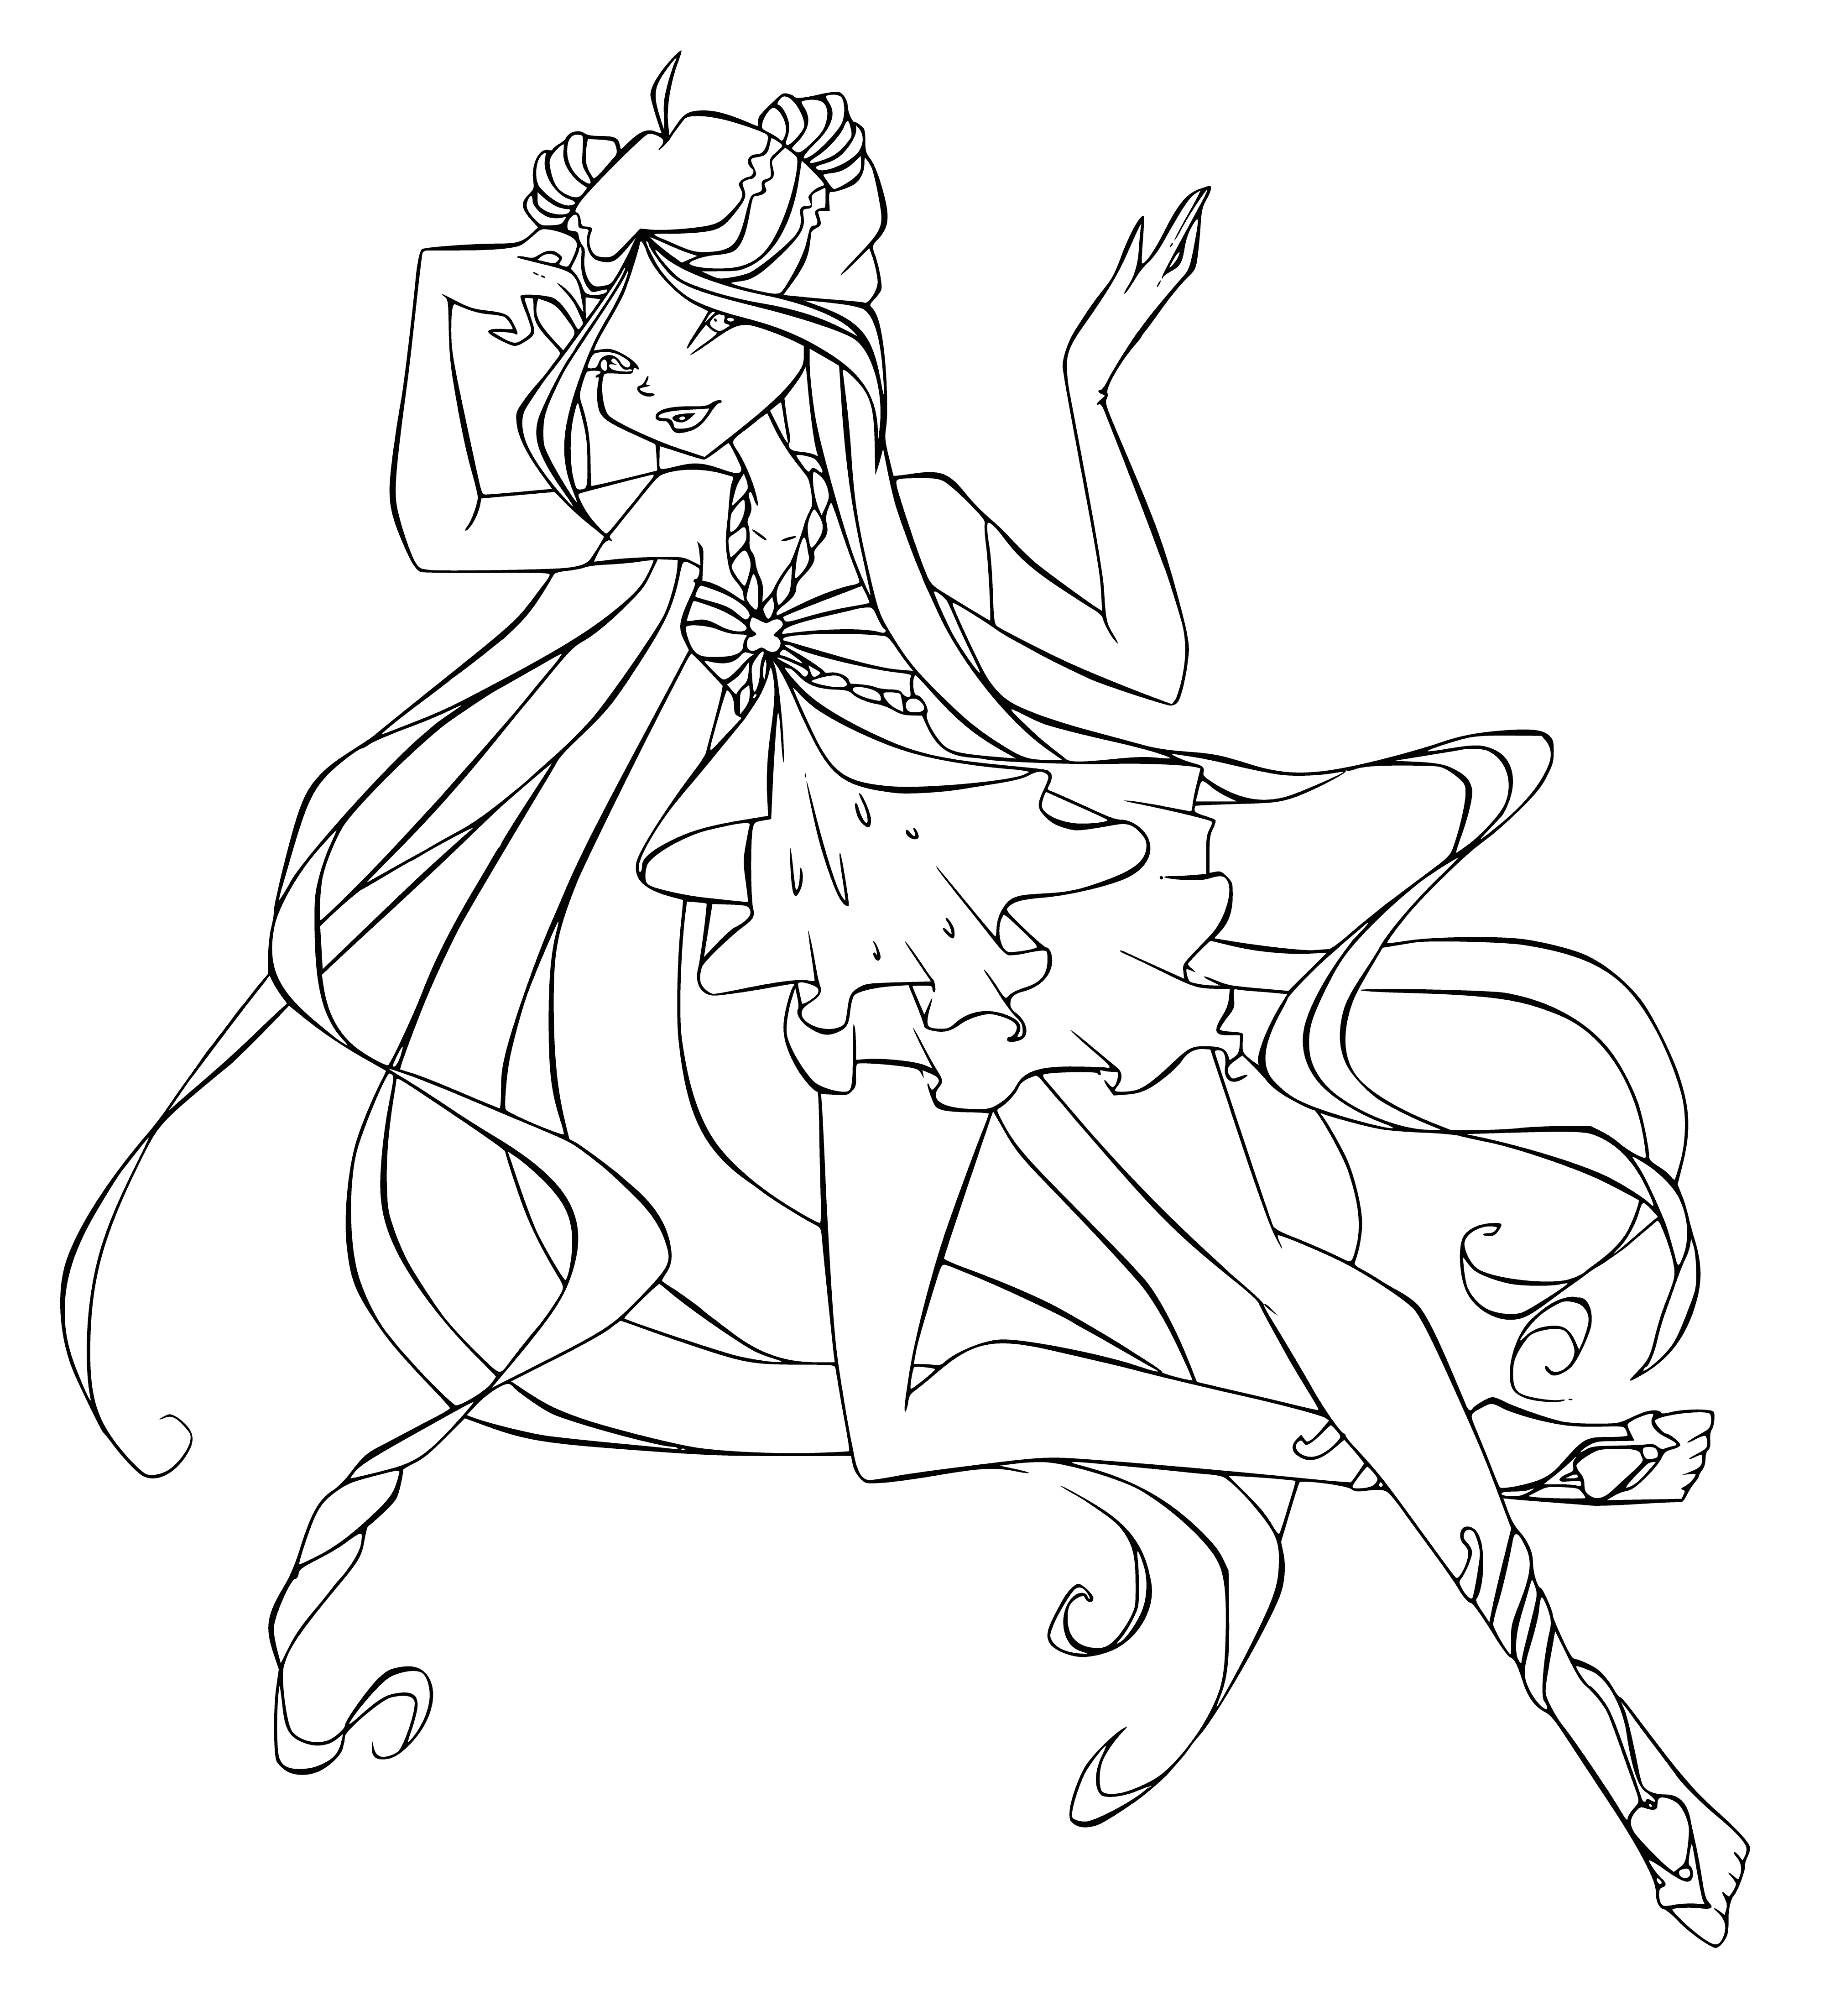 coloring page: Fairy Flora is a gentle, kind fairy surrounded by colorful flowers. She wears a simple white dress and delicate wings, and holds a large, pink flower.